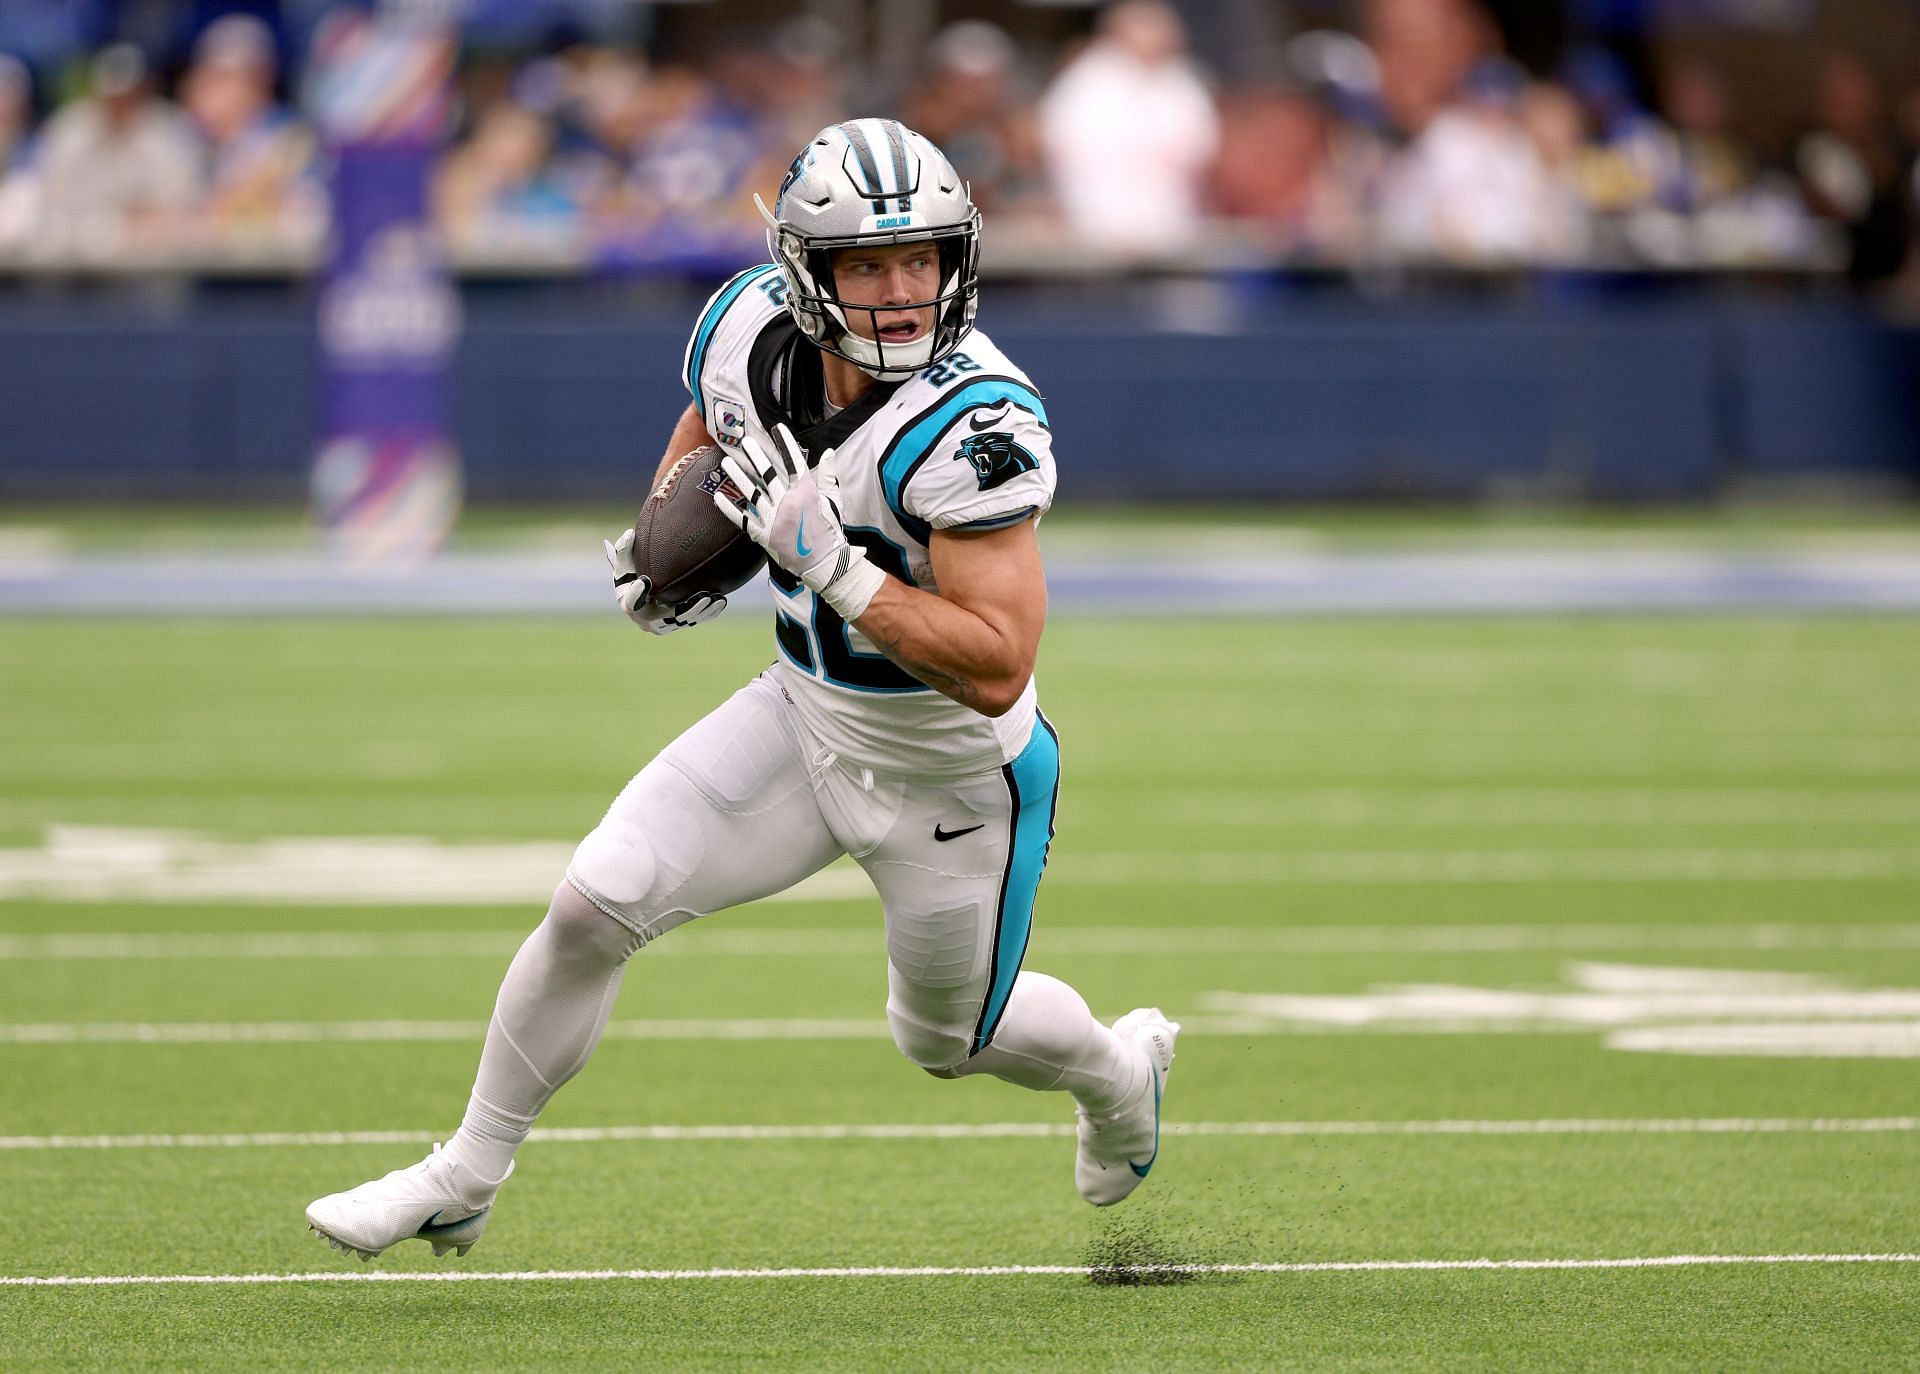 The Panthers traded Christian McCaffrey for picks